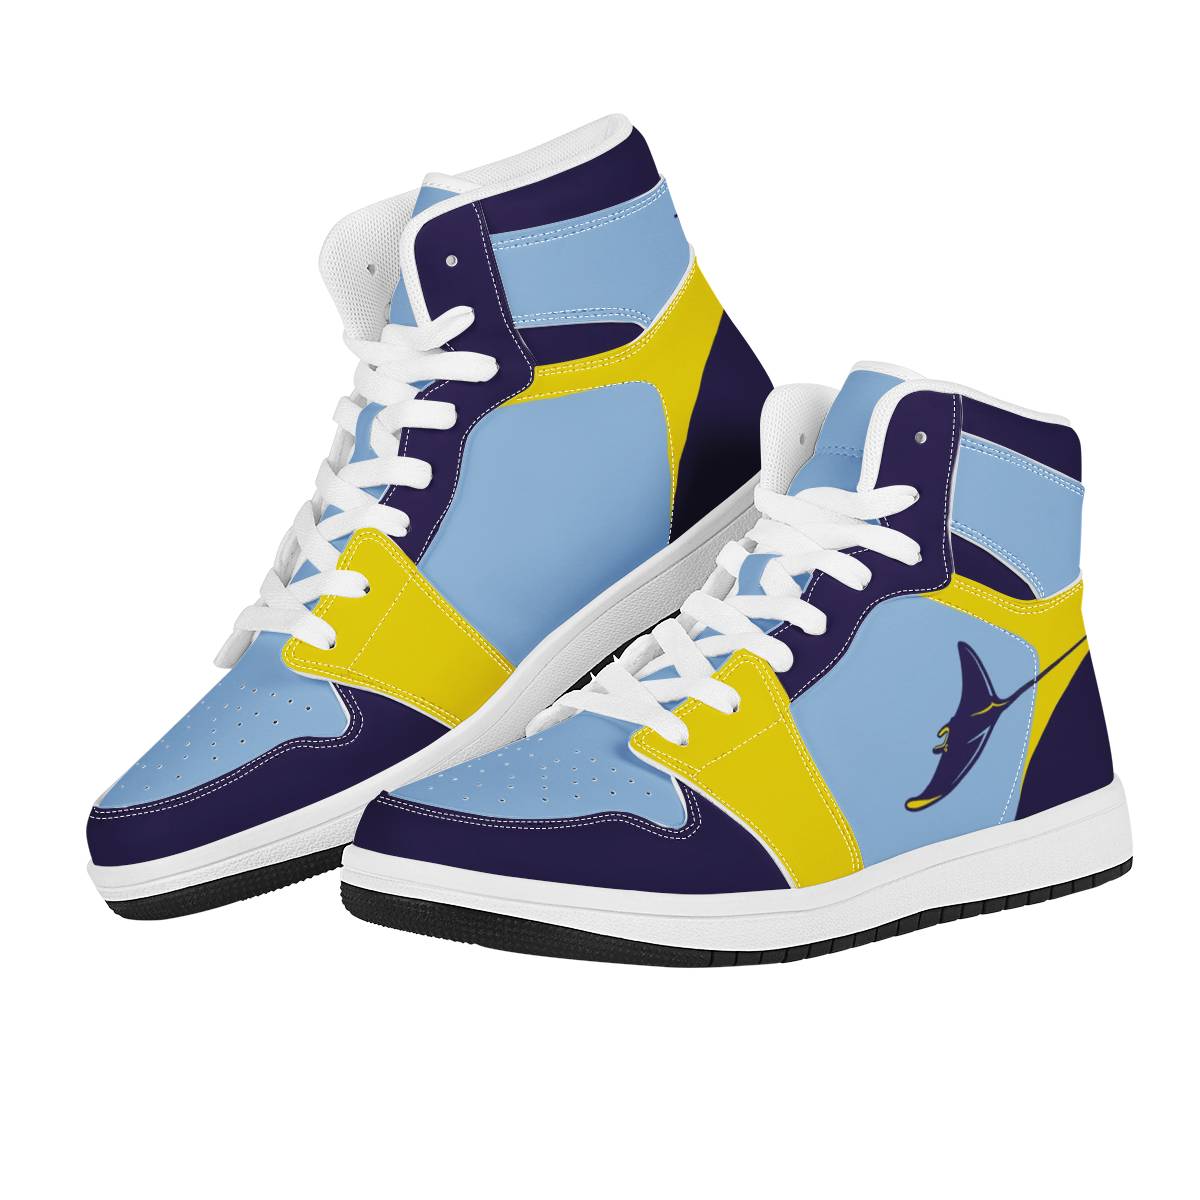 Women's Tampa Bay Rays High Top Leather AJ1 Sneakers 001